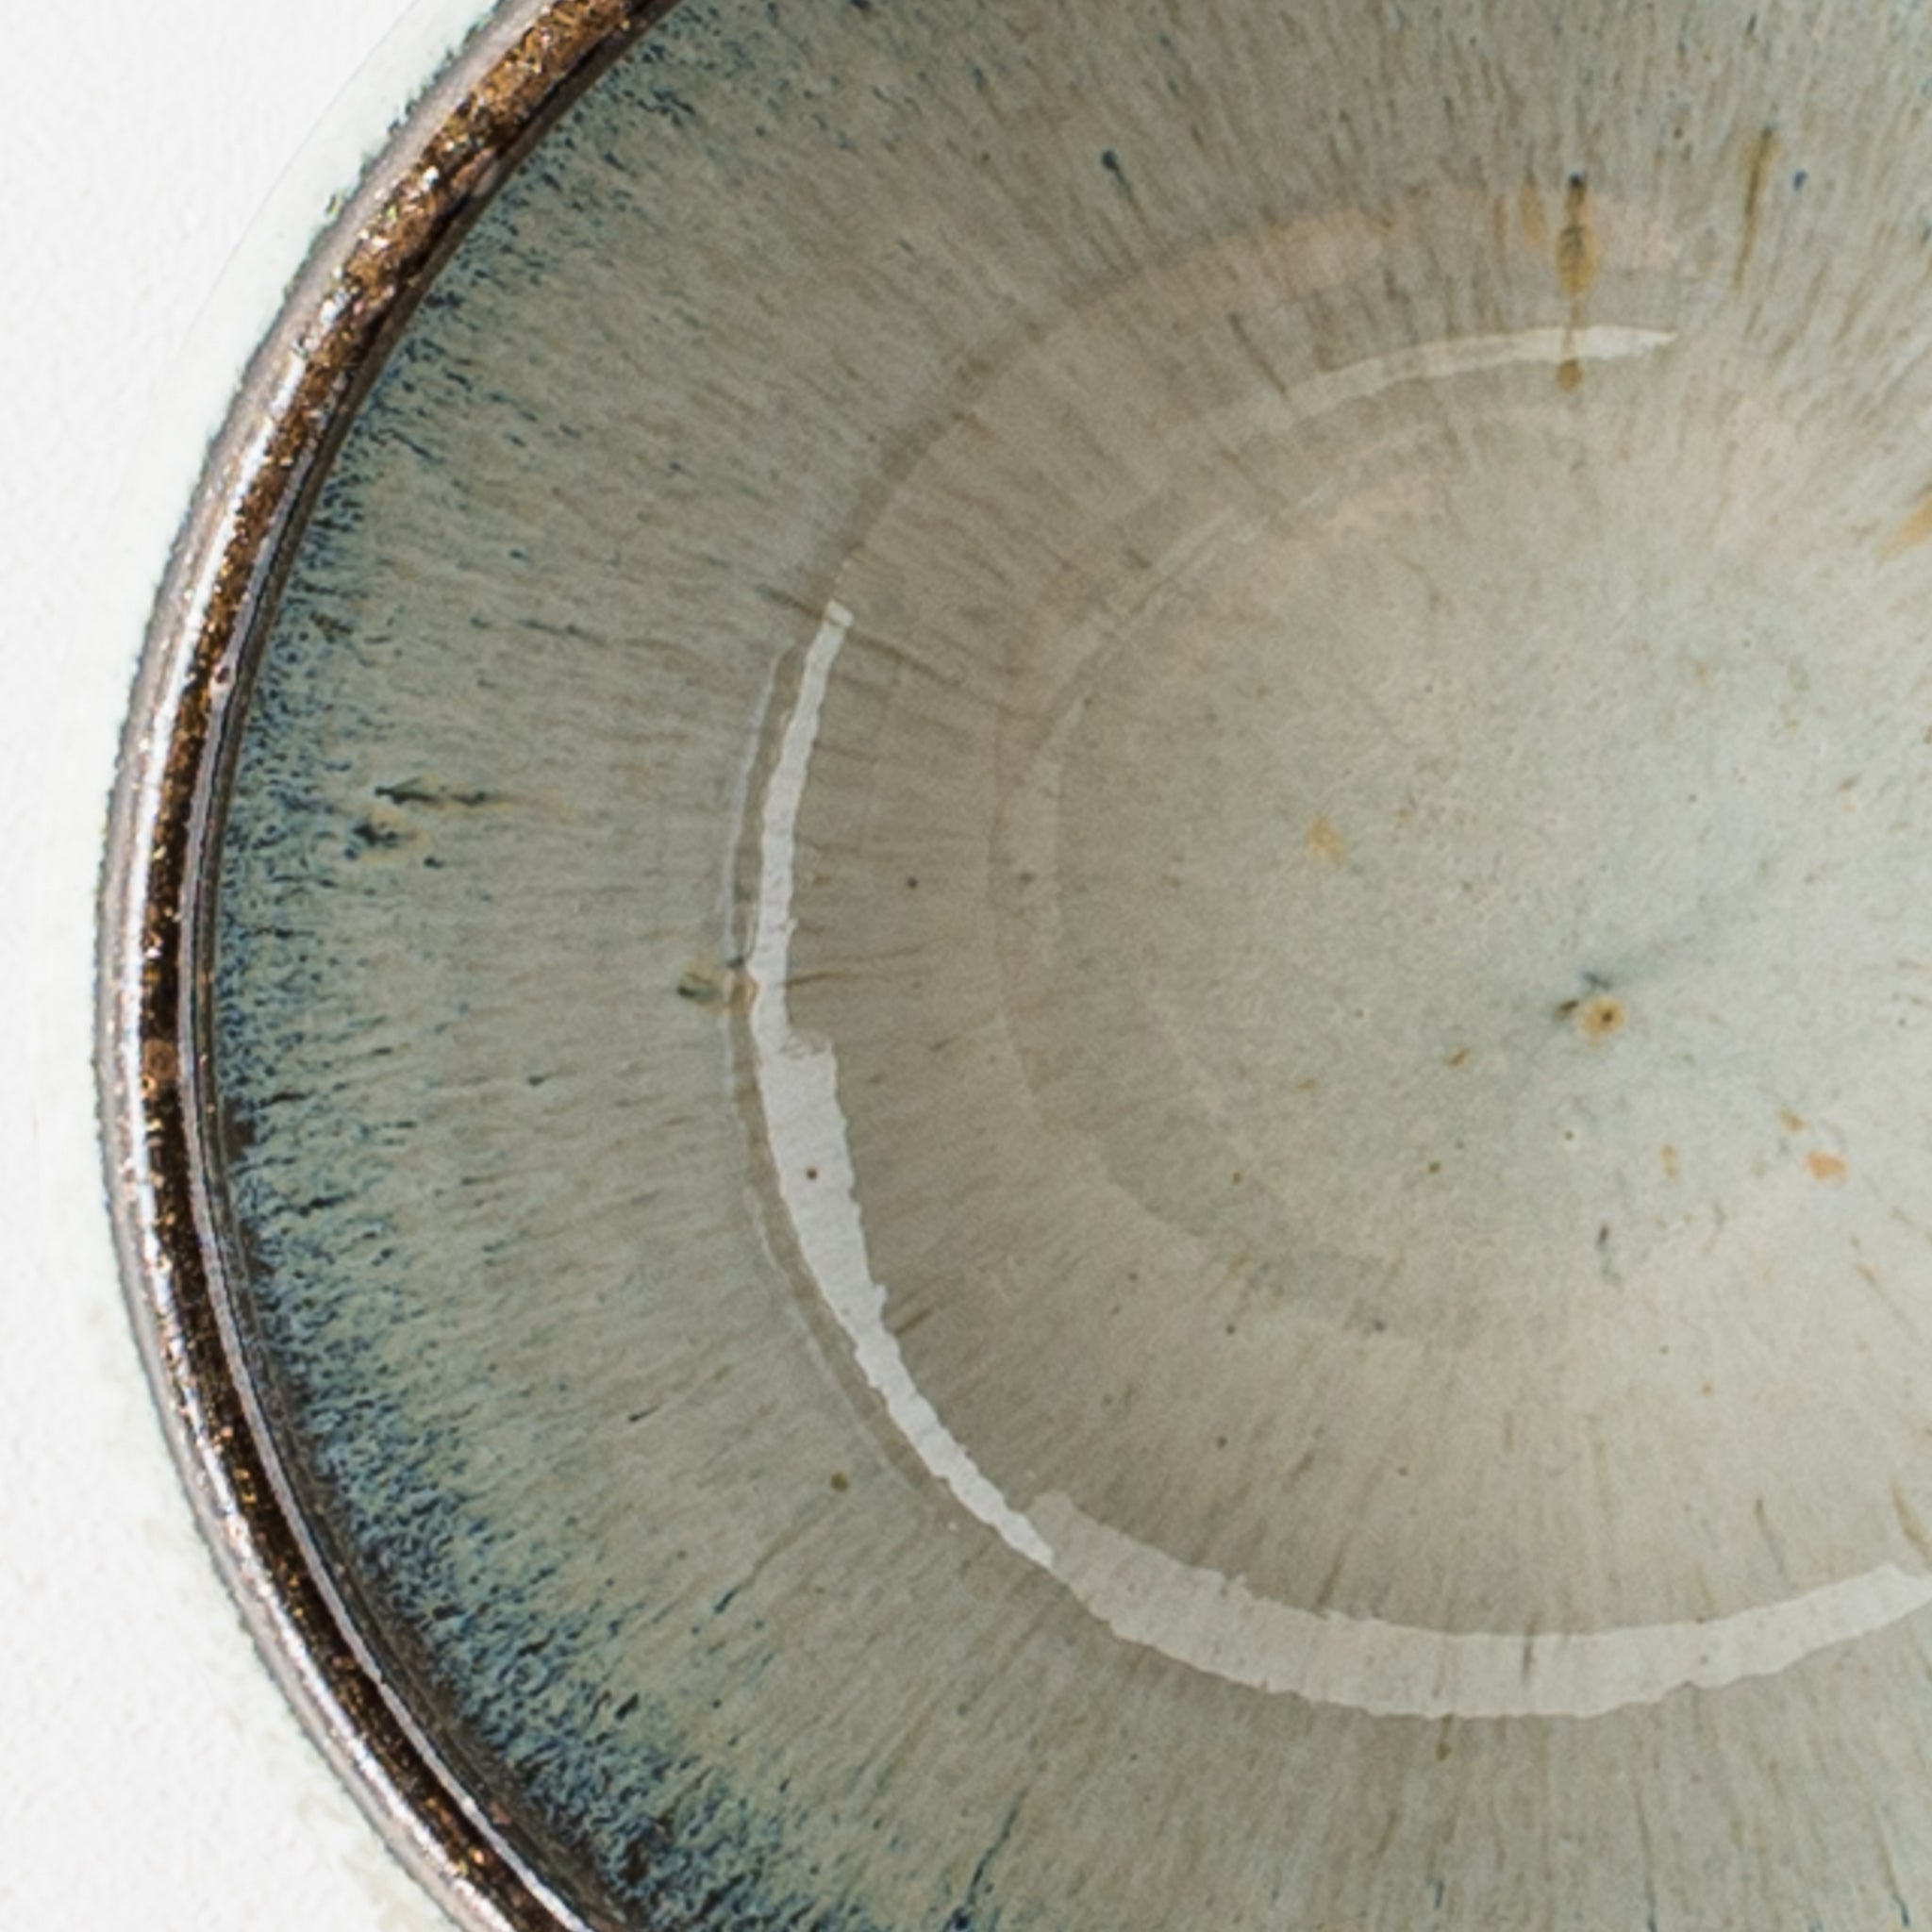 A 5.5-sun rice bowl from Shodai-yaki Fumoto Kiln with its fantastic blue and white color